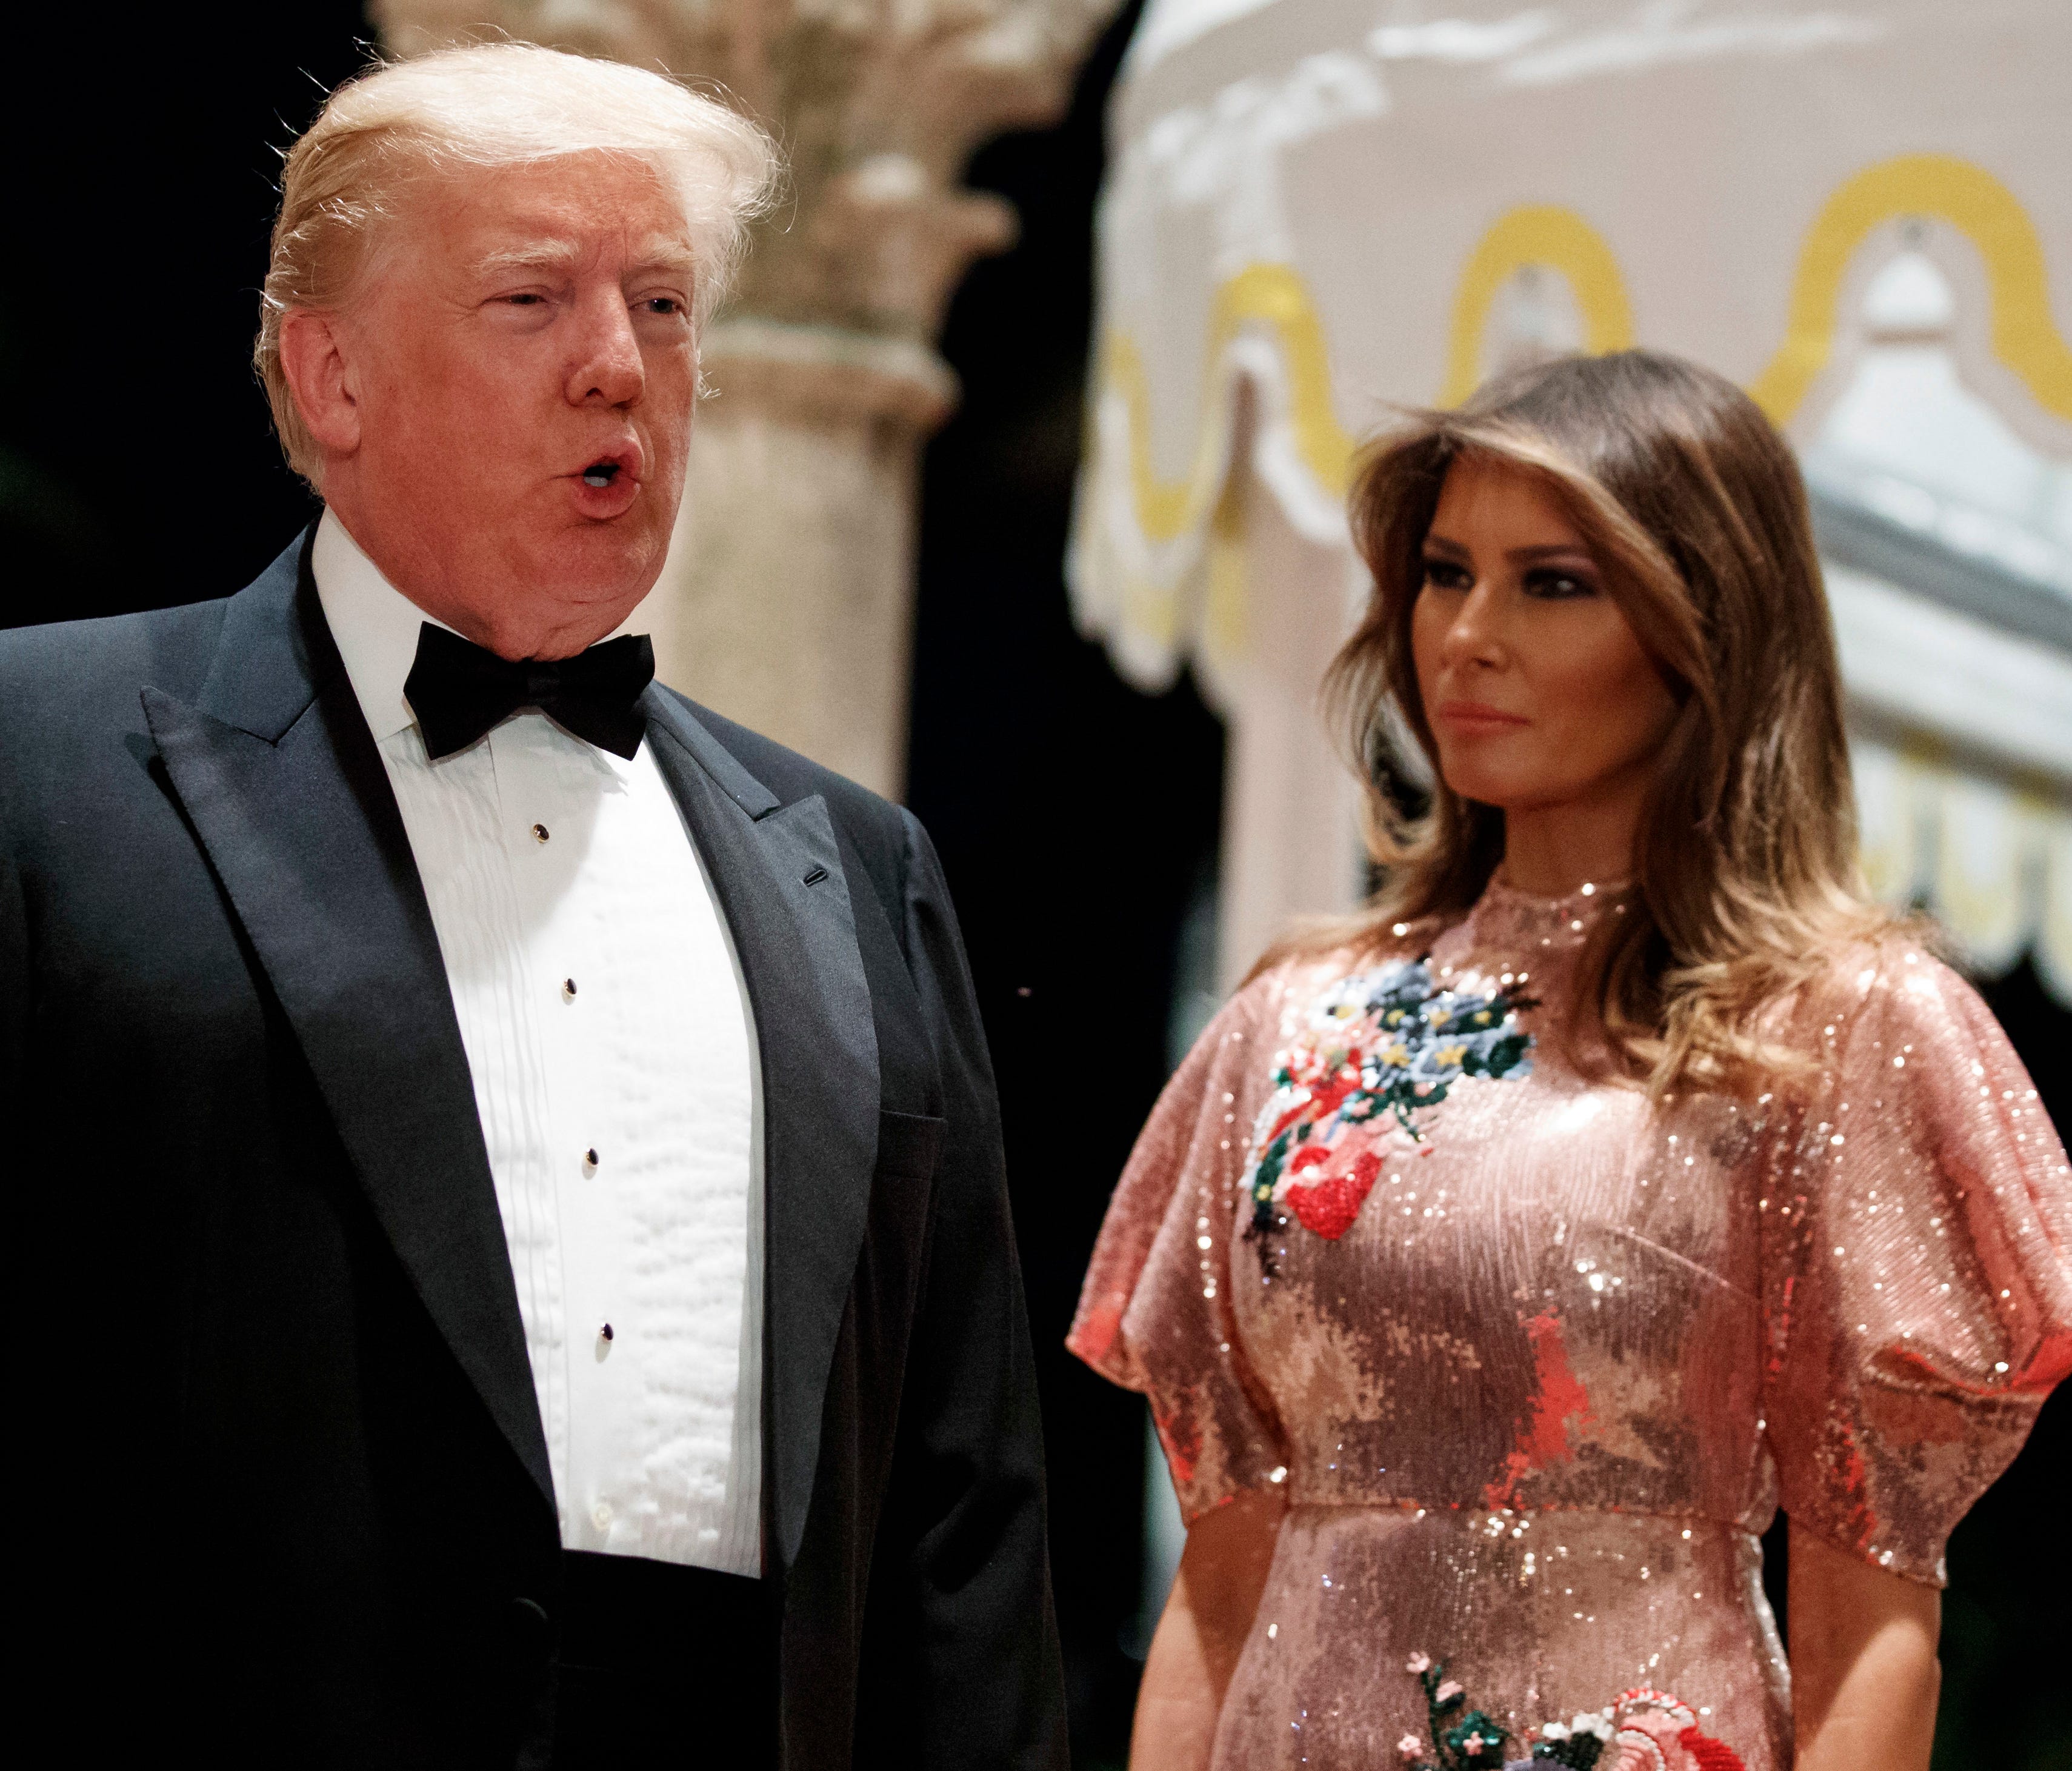 First lady Melania Trump looks on as President Trump speaks with reporters at a New Year's Eve gala at his Mar-a-Lago resort Dec. 31, 2017, in Palm Beach, Fla.